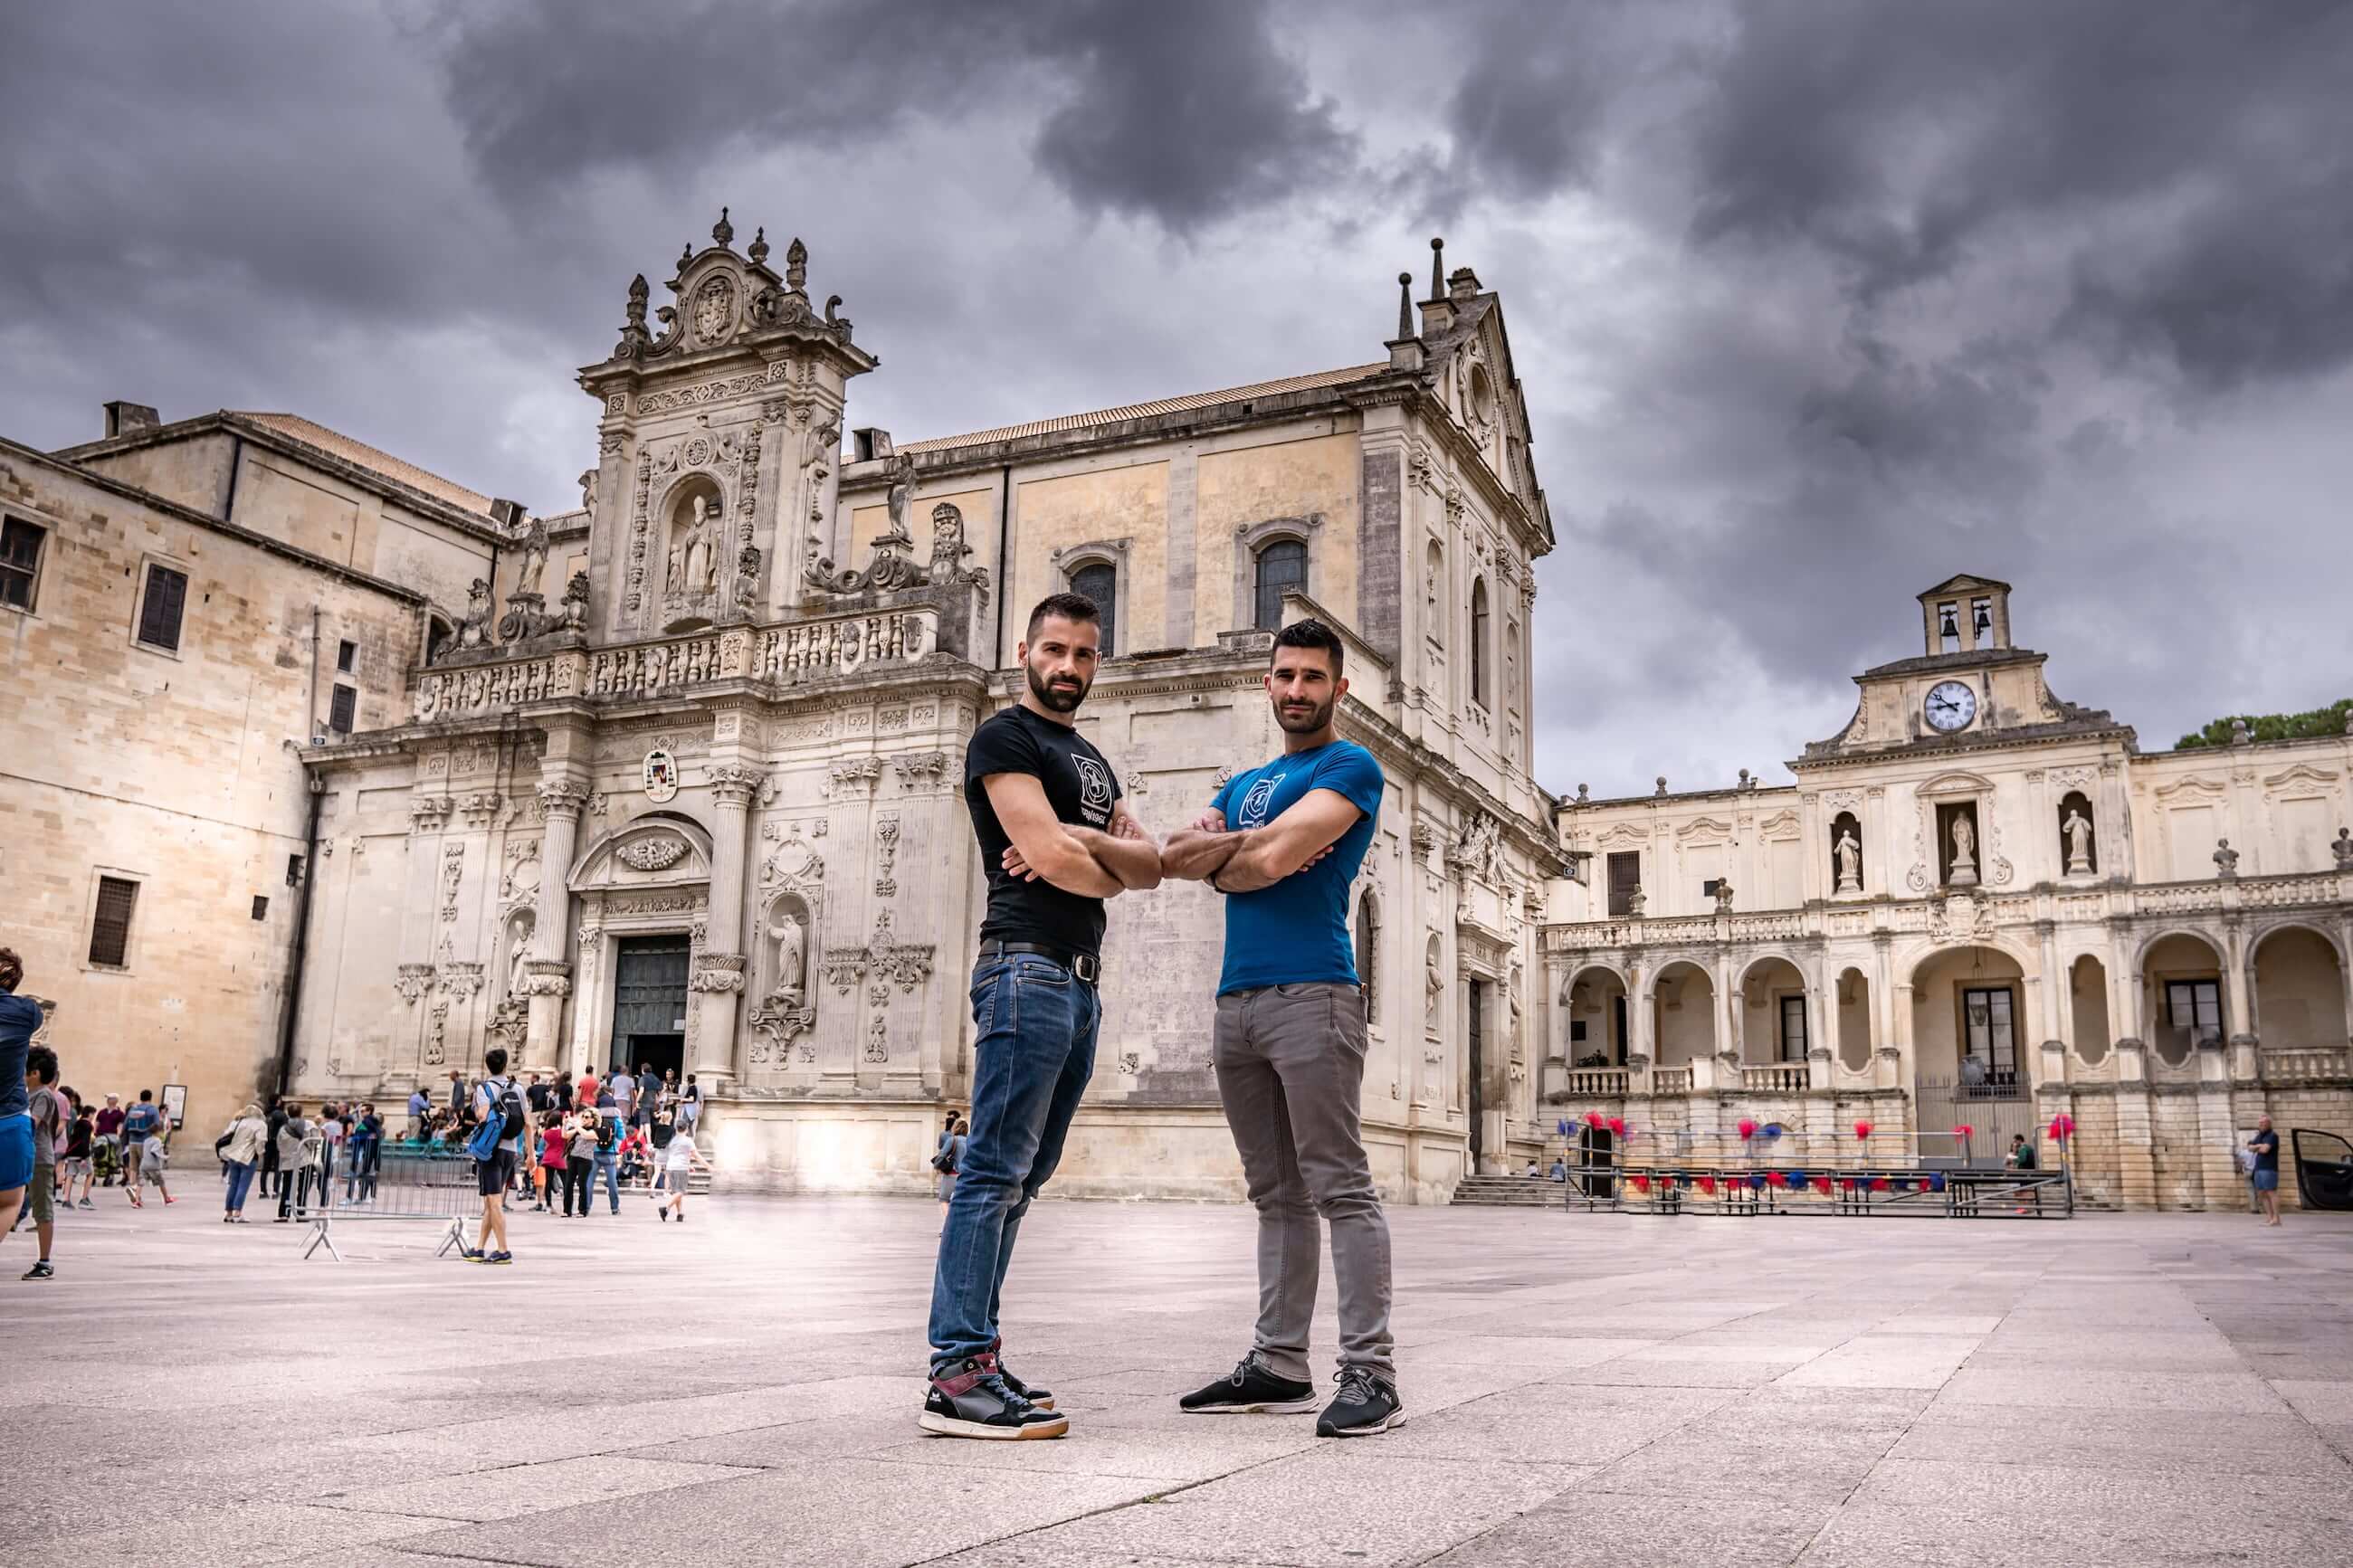 A Photo of Puglia Lecce Piazza Duomo Italy and budget travel tips for your Europe Bucket List